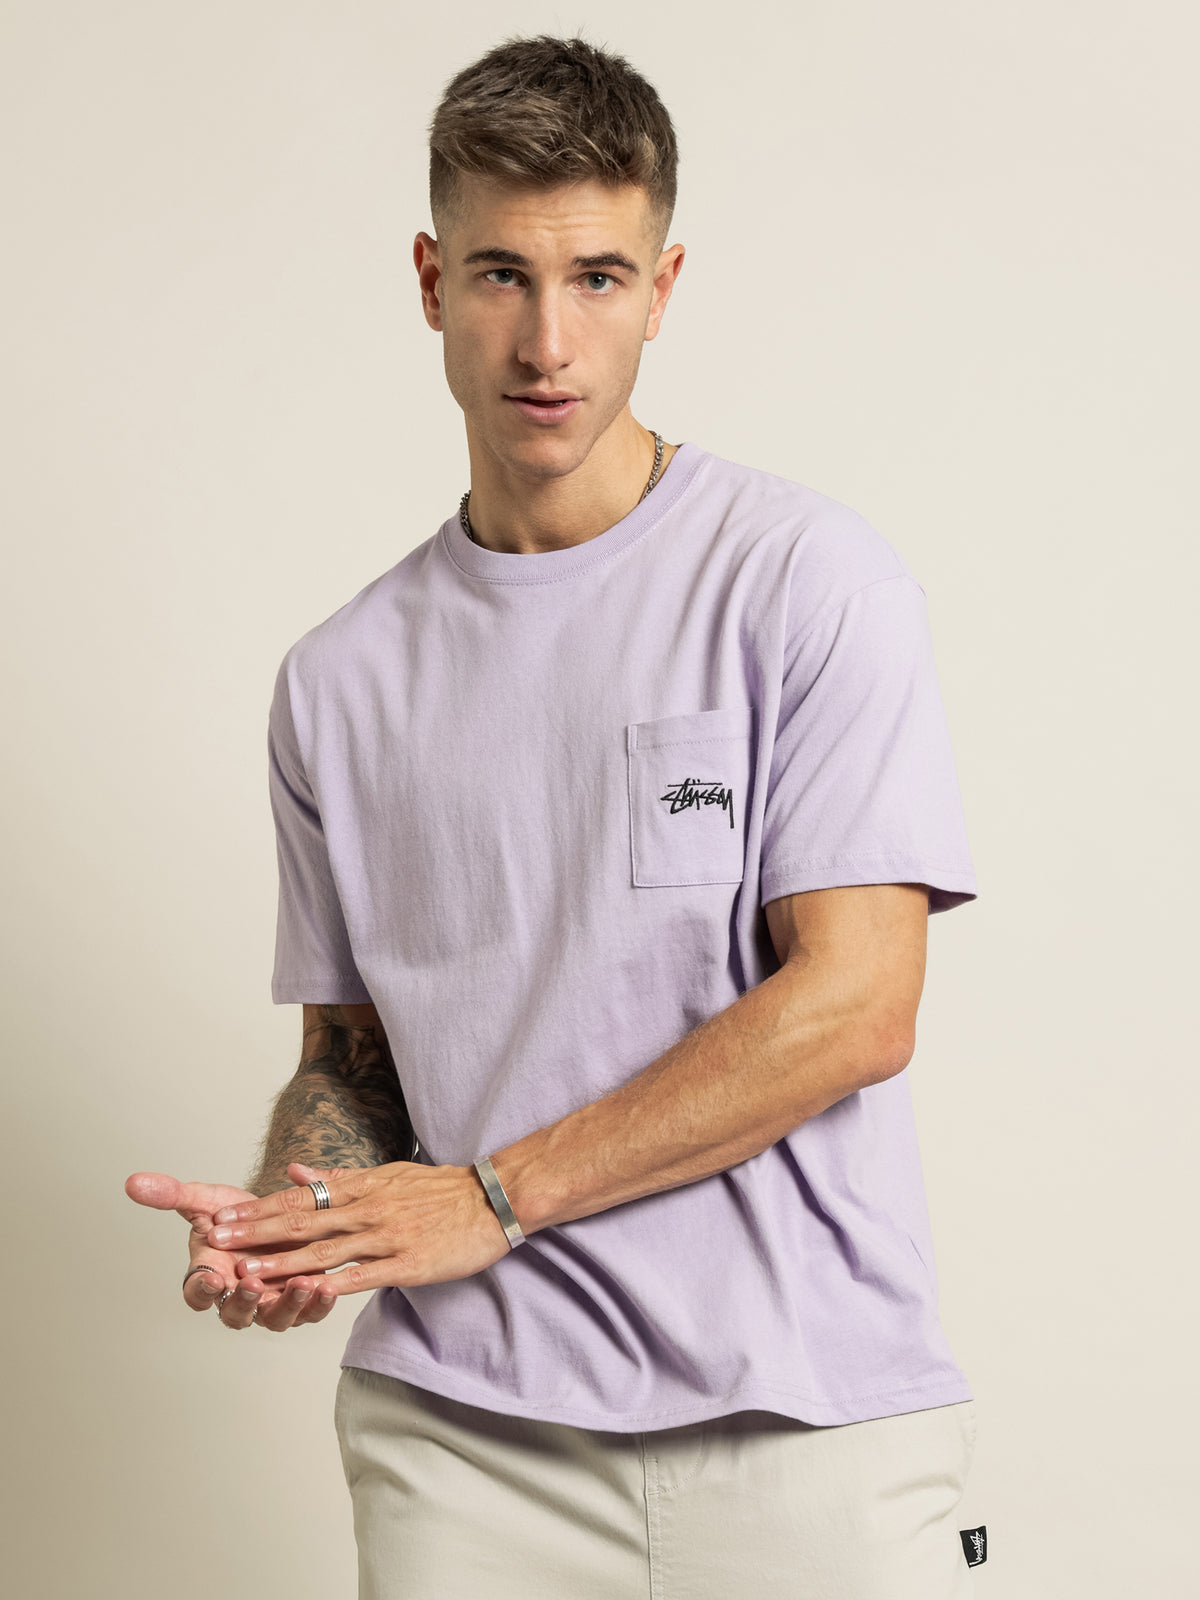 Design Lab T-Shirt in Lilac